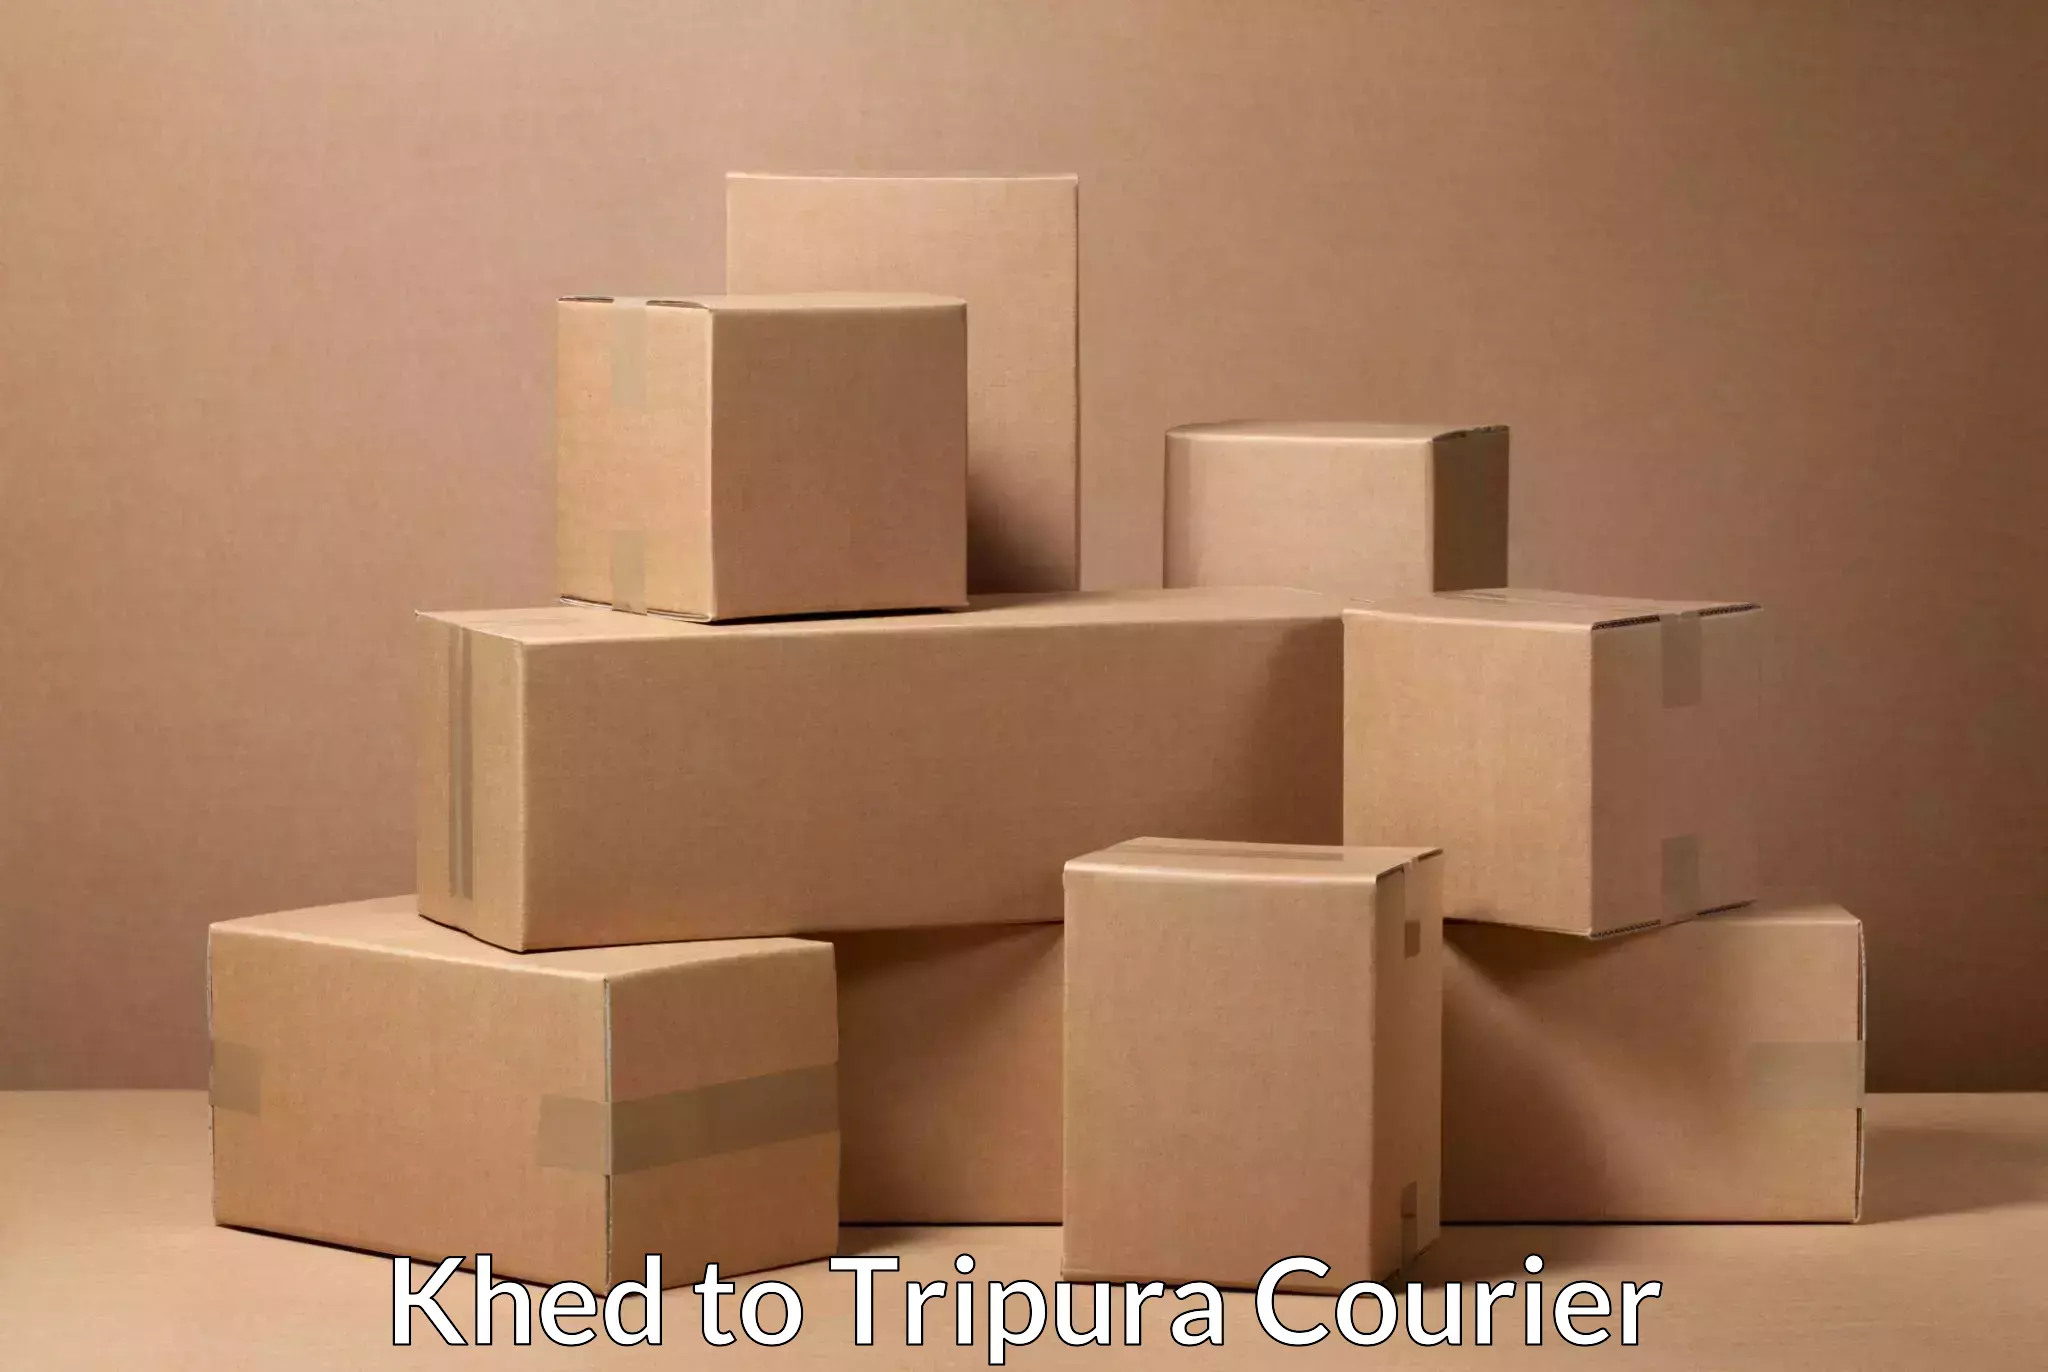 Global shipping solutions in Khed to Tripura